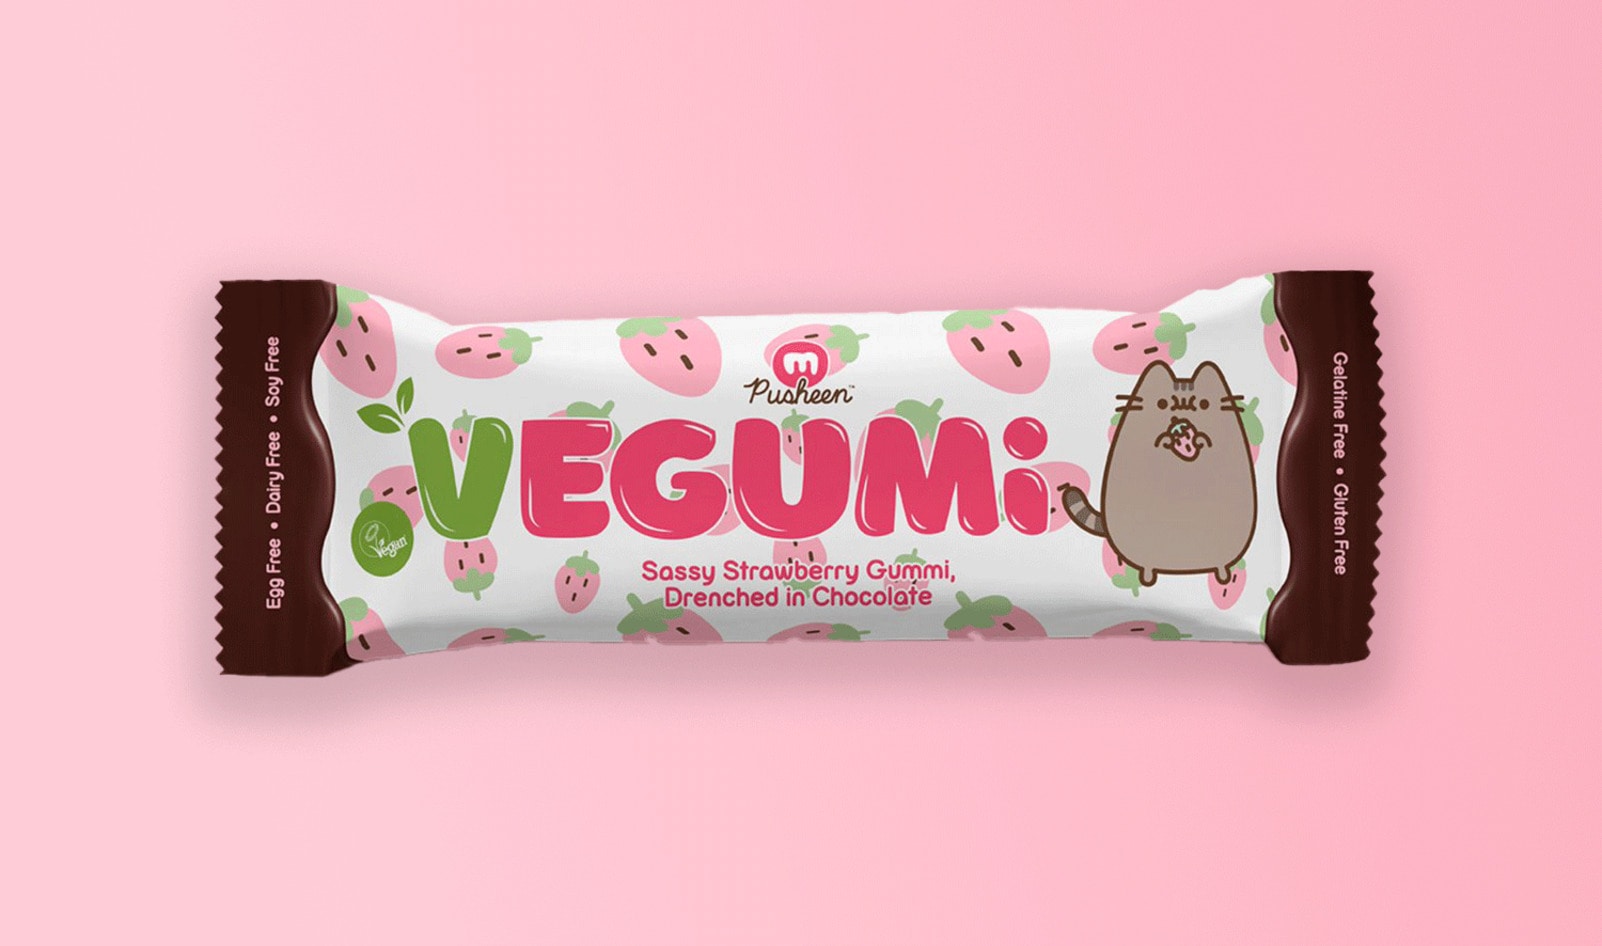 New Vegan Chocolate-Covered Gummy Bars Launch in Partnership with Pusheen the Cat